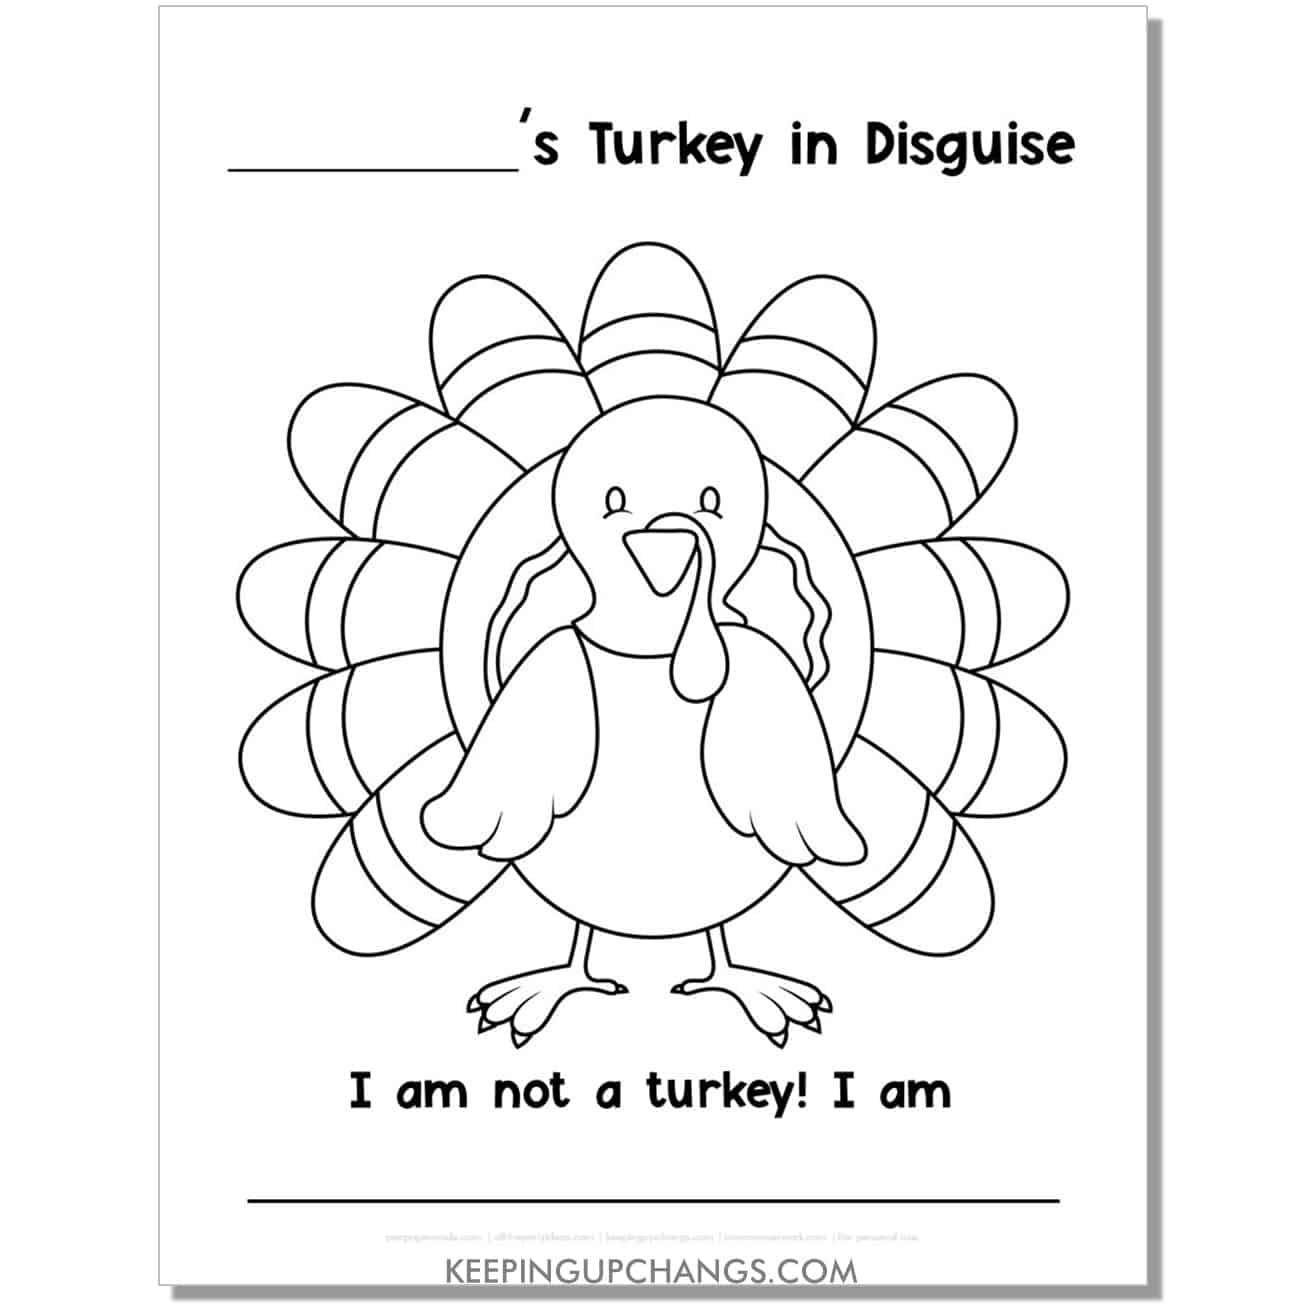 free turkey disguise project template with large full page turkey.